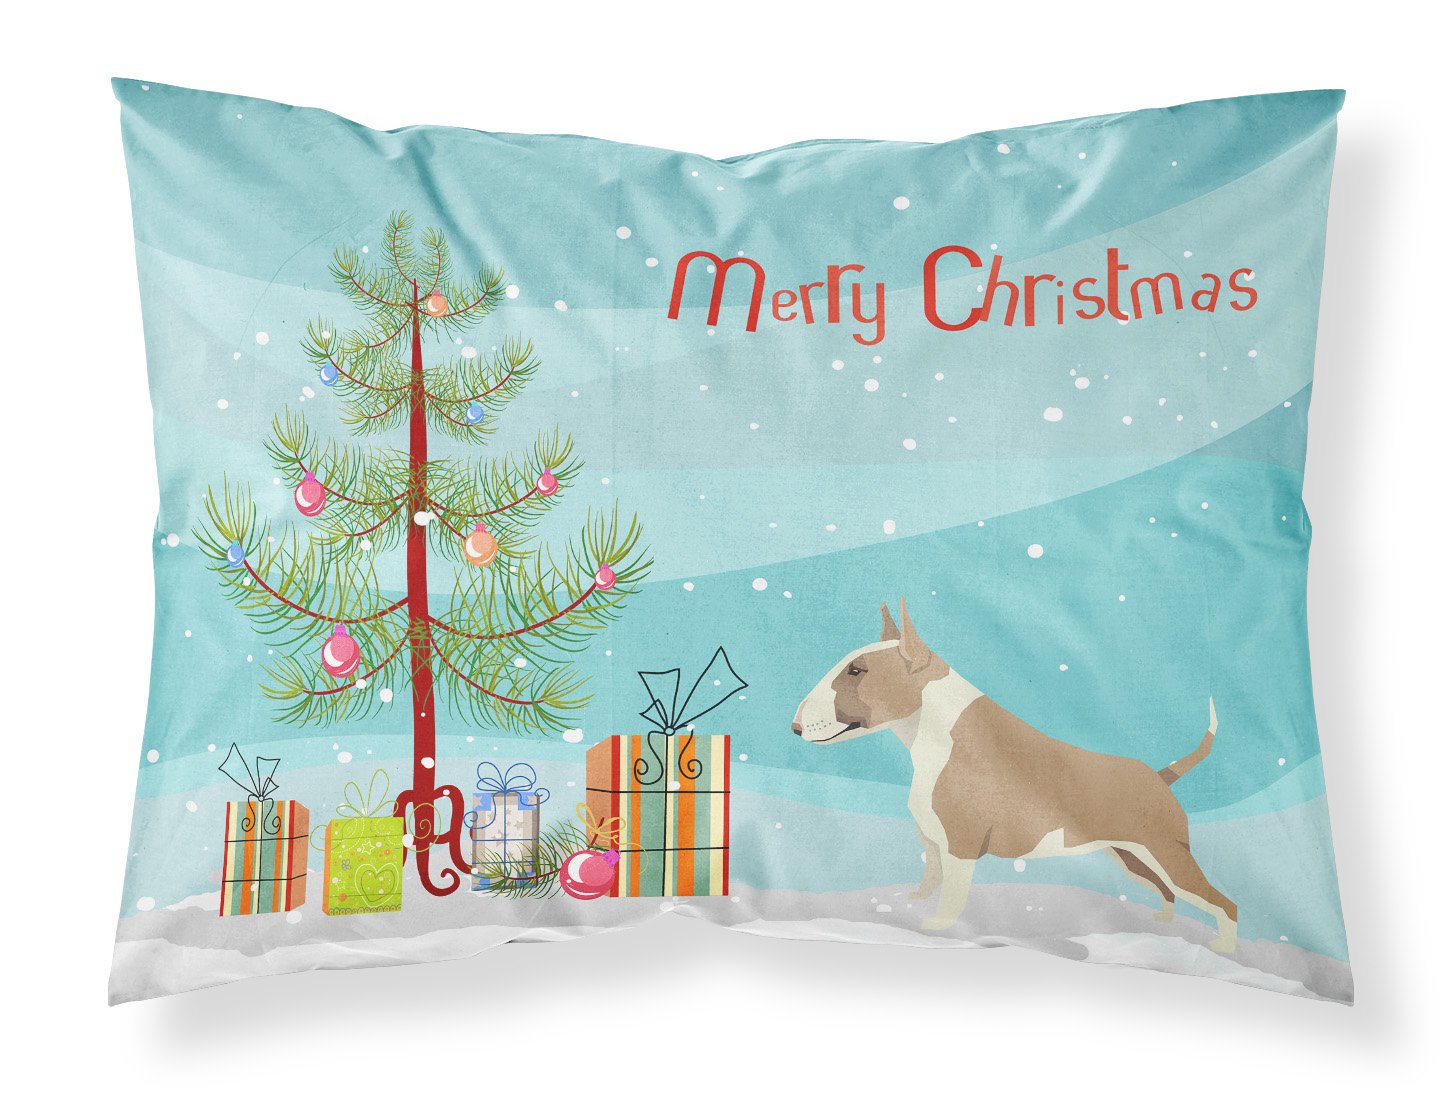 Fawn and White Bull Terrier Christmas Tree Fabric Standard Pillowcase CK3528PILLOWCASE by Caroline's Treasures